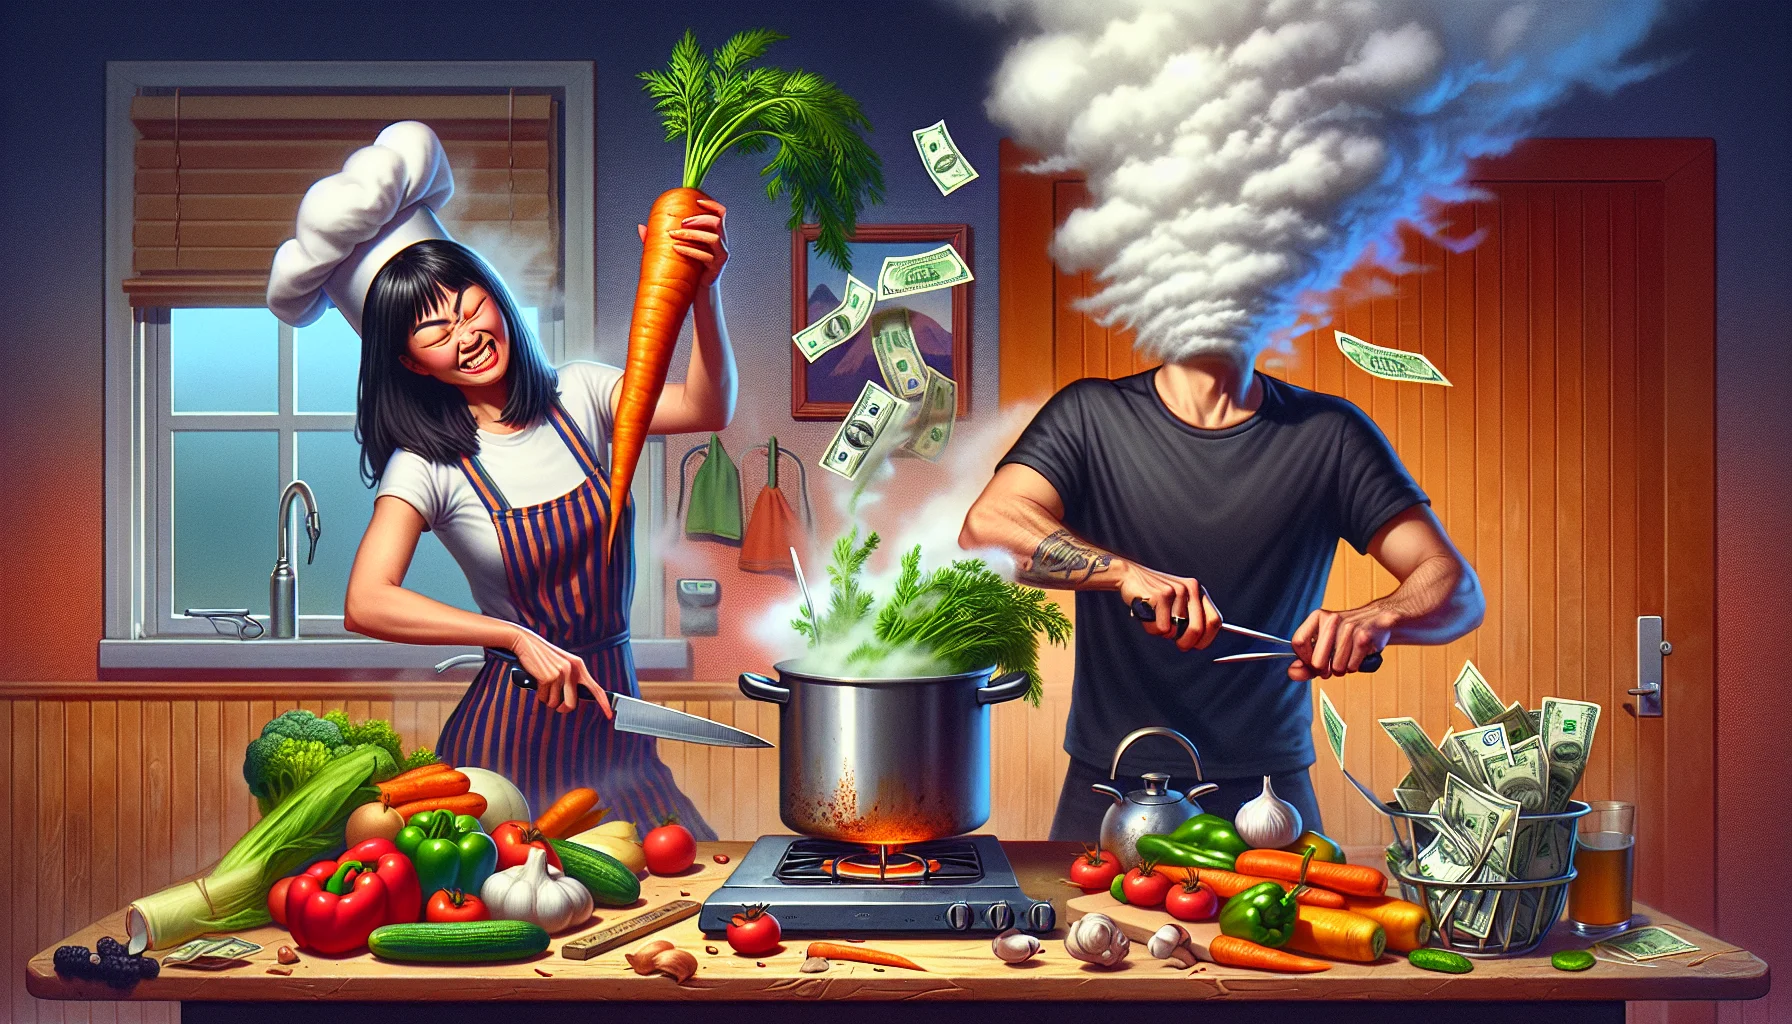 A humorously chaotic kitchen scene that aptly demonstrates the challenge of living without a microwave. An Asian female and Caucasian male are preparing a healthy meal together. The woman is holding up a raw carrot like a sword while a humorous cloud of steam rises from a boiling pot, obscuring the man's face as he manages an abundance of fresh, colorful vegetables. The man stands by a cutting board full of veggies, holding up a pair of tongs like they're precision tools. Dollars bills are sneaking out of the fridge, hinting towards the monetary saving aspect of home-cooked meals.